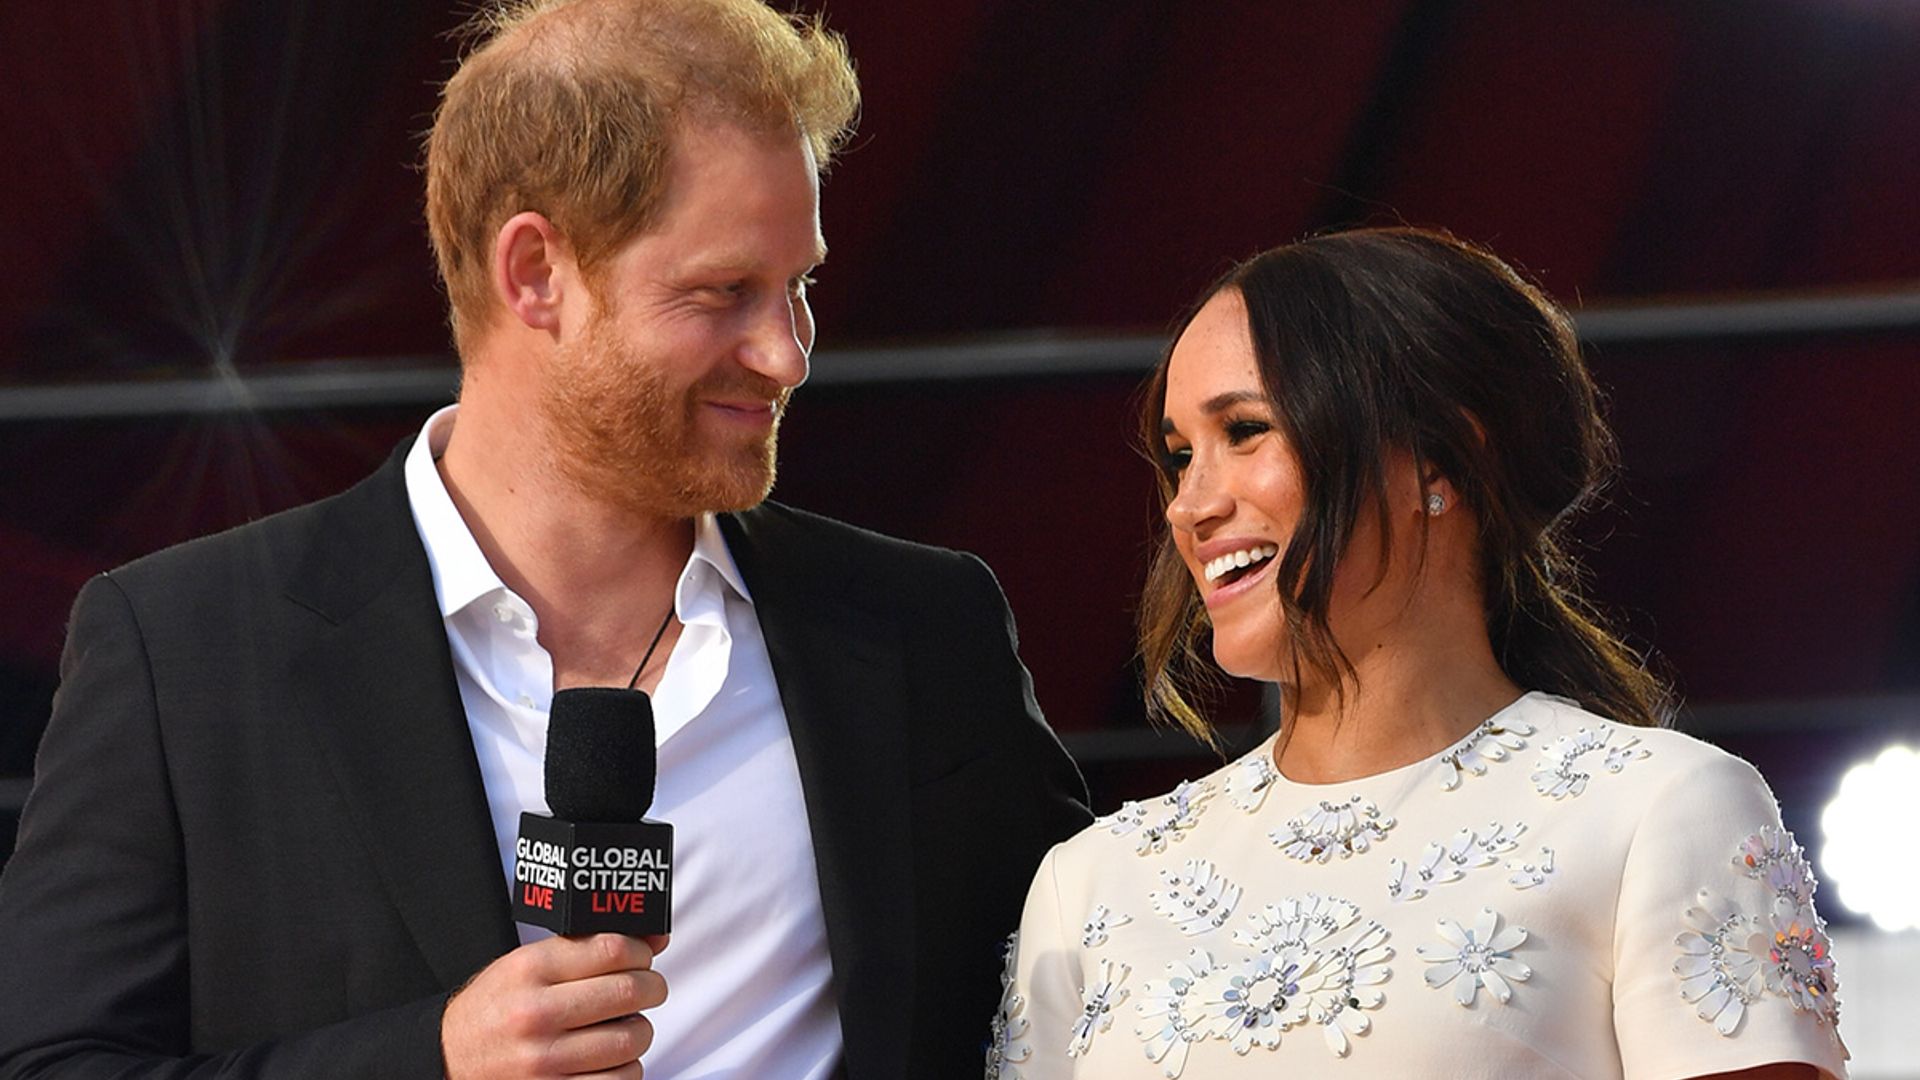 Meghan Markle's latest beauty trick that has Prince Harry swooning